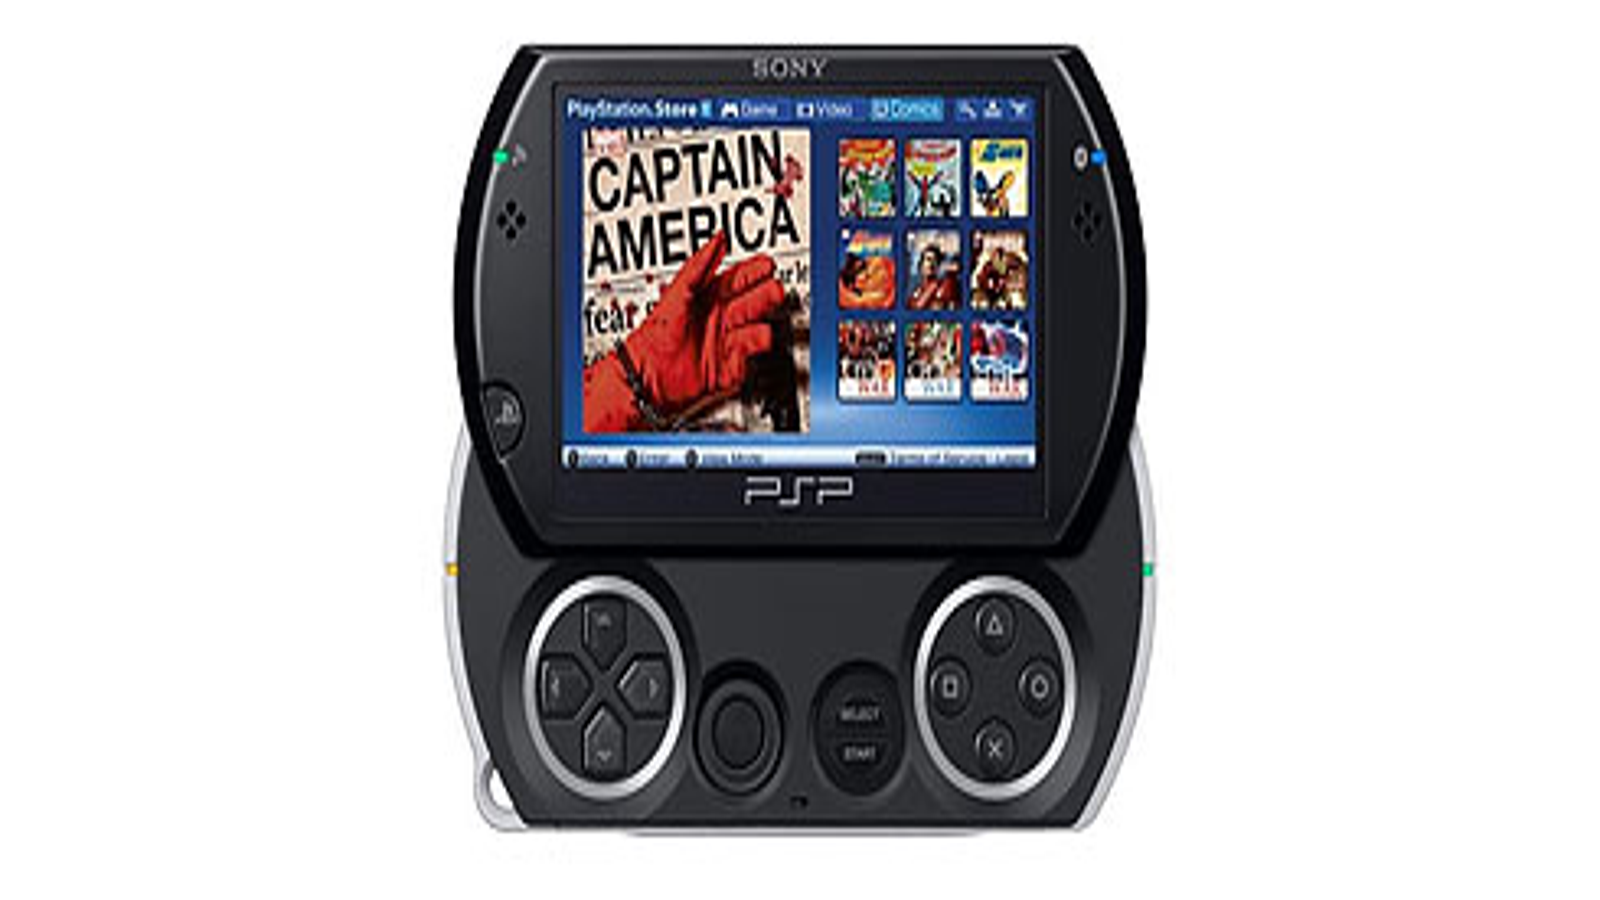 Buying a PSP Go and Games in 2021: The Original Digital Edition 